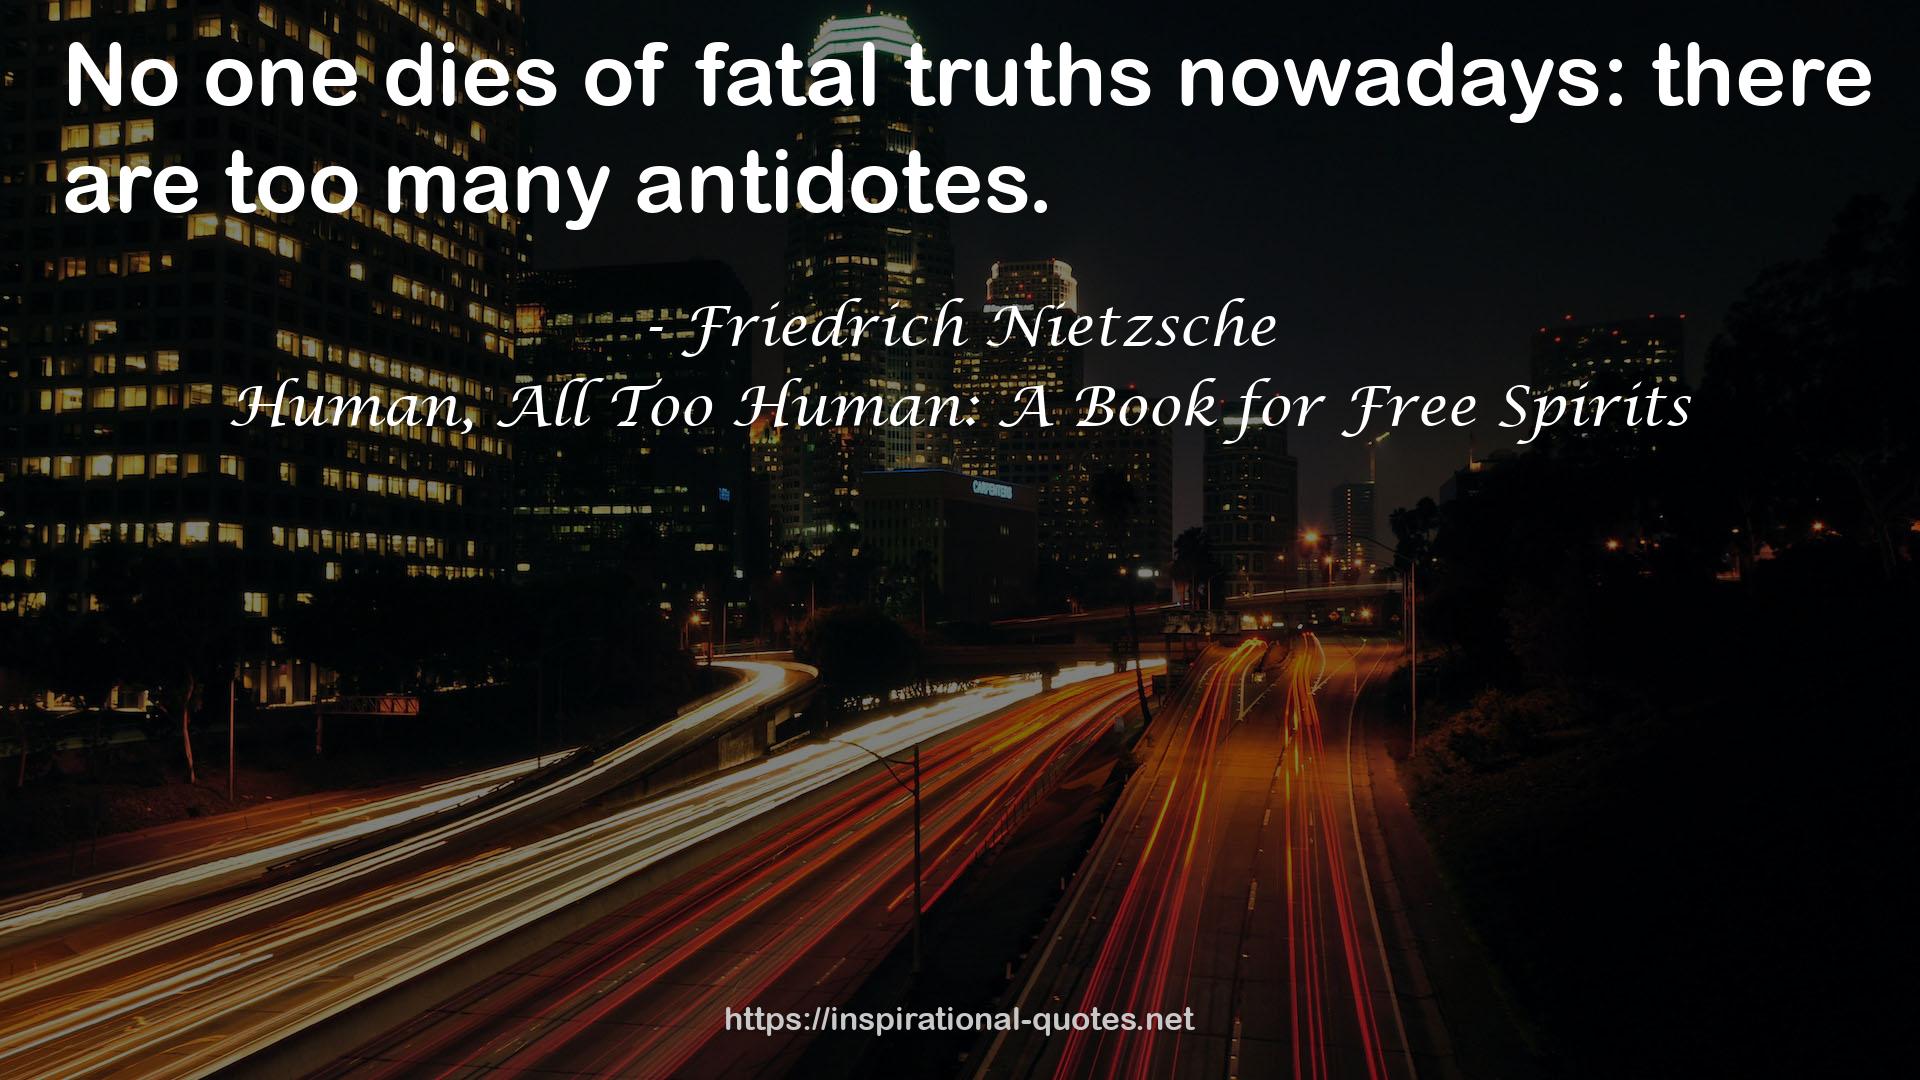 fatal truths  QUOTES